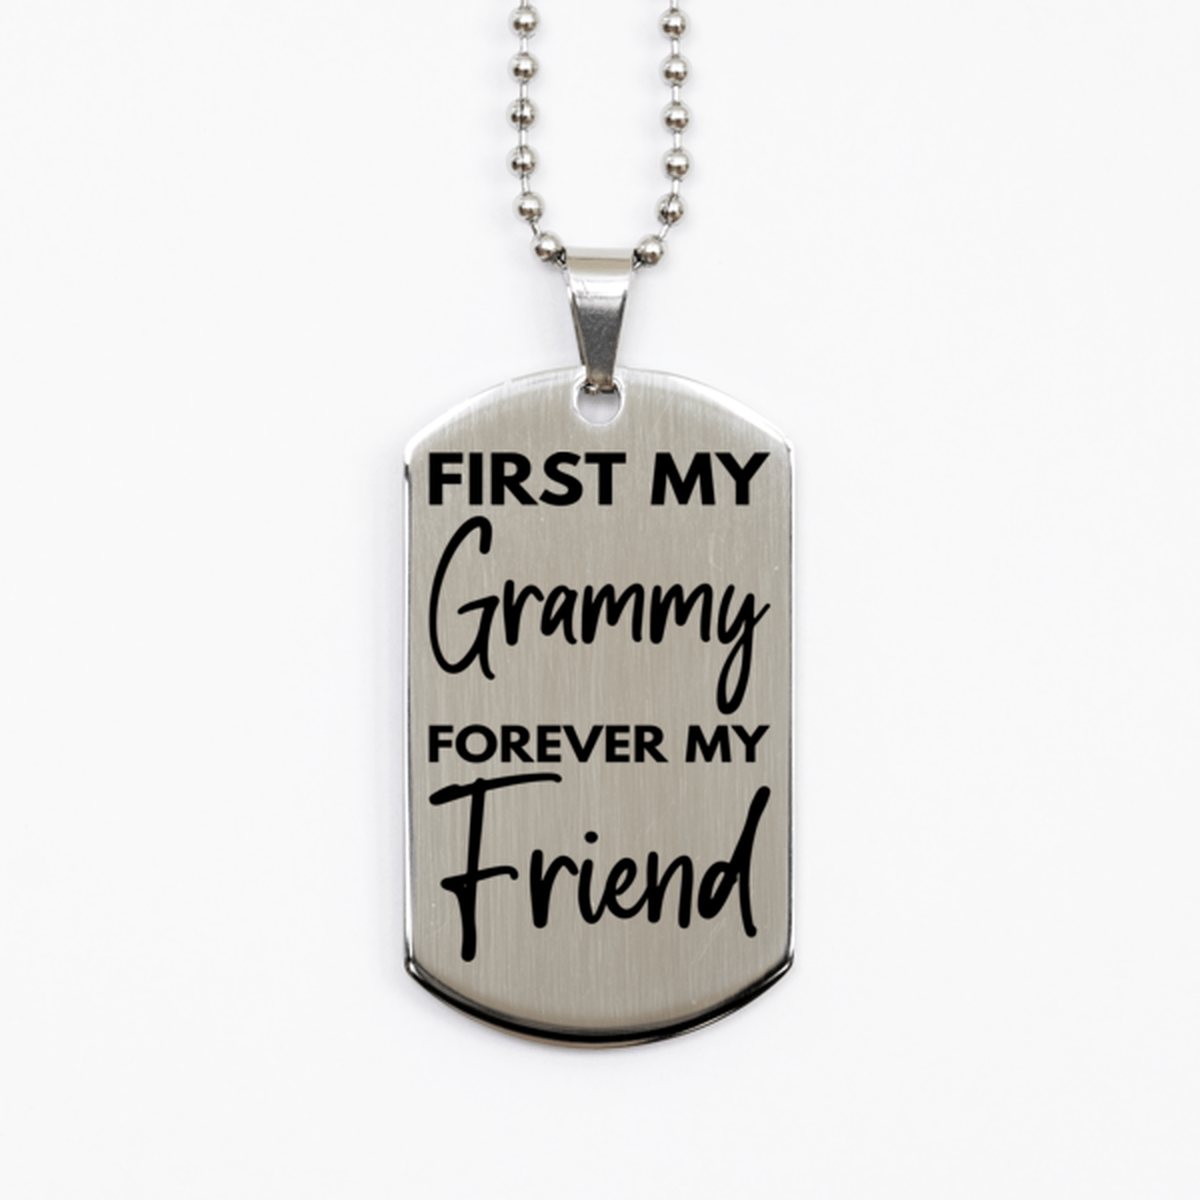 Inspirational Grammy Silver Dog Tag Necklace, First My Grammy Forever My Friend, Best Birthday Gifts for Grammy